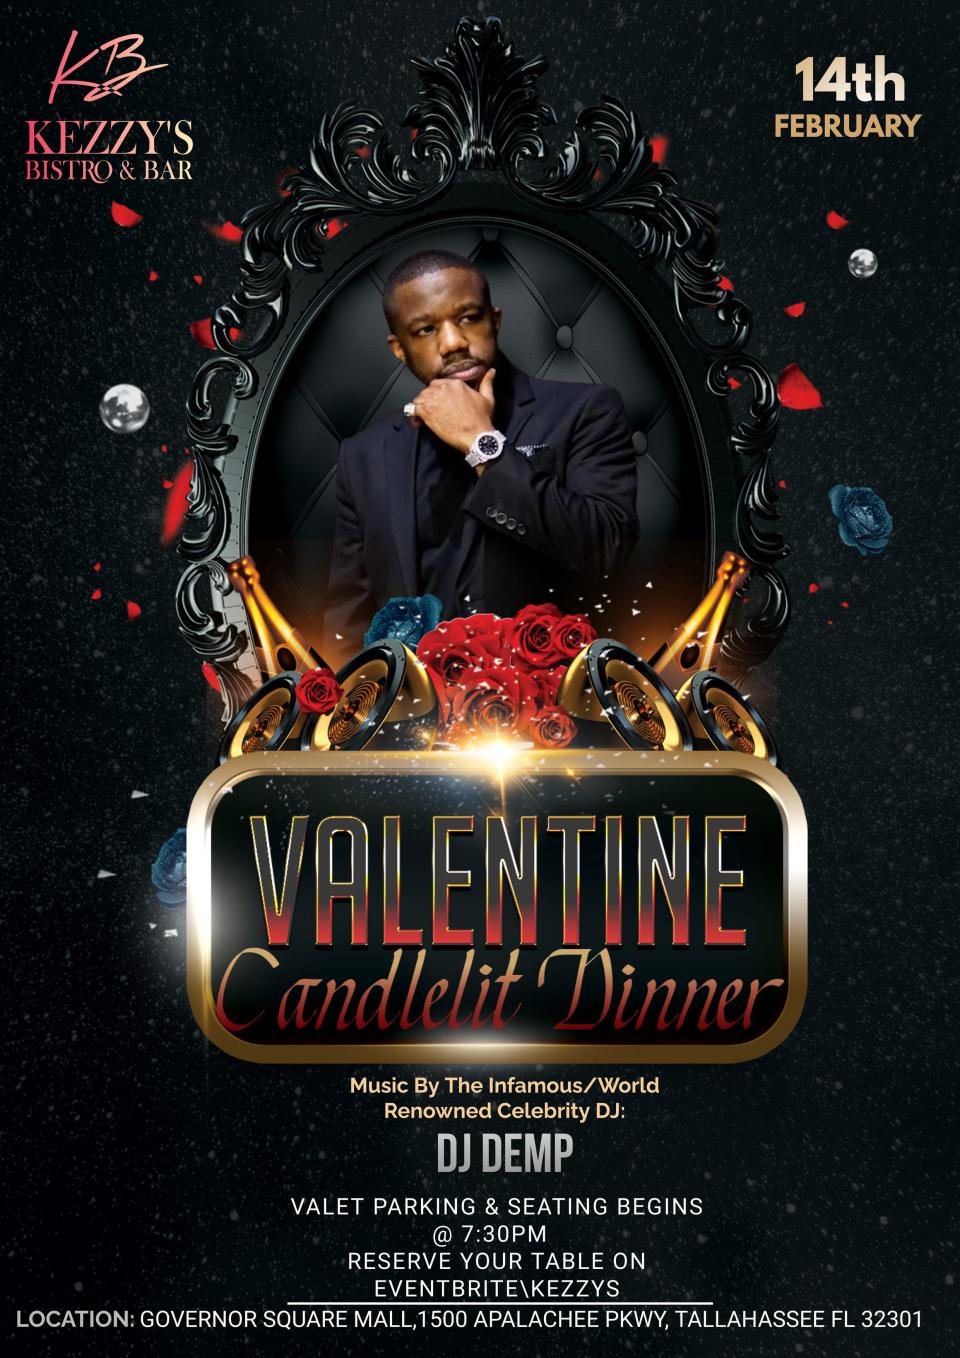 Kezzy's Bistro and Bar is offering a Valentine candlelit dinner for its customers that features DJ Demp.